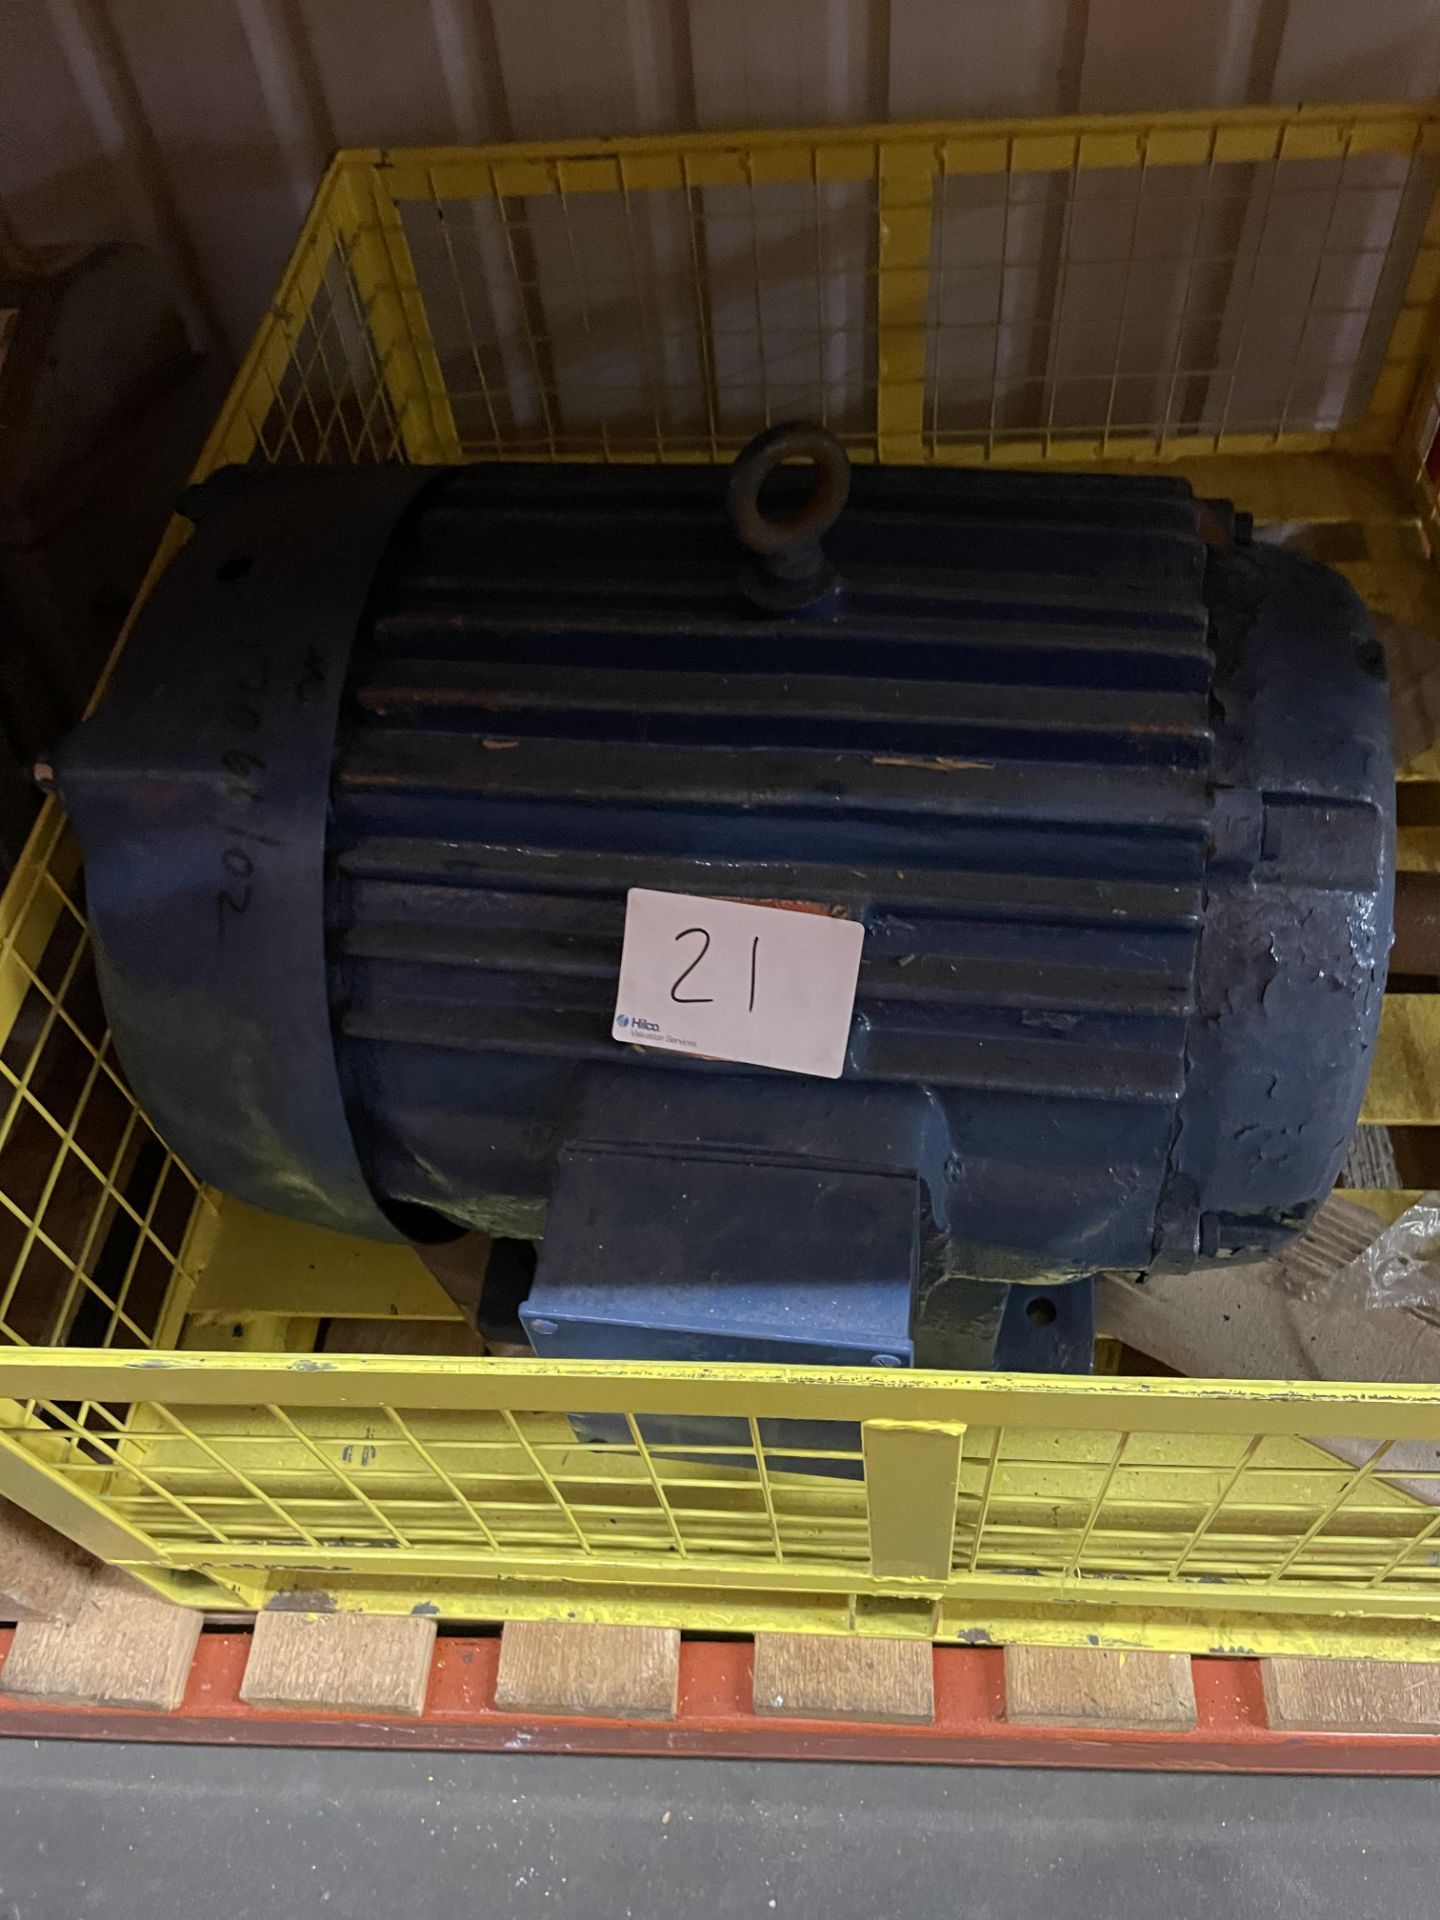 1 Motor 40Hp 1470 RPM Frame Size D326M 415V 3Ph. 50C Foot Mounted. (150Kgs) Part No 1706102 Locatio